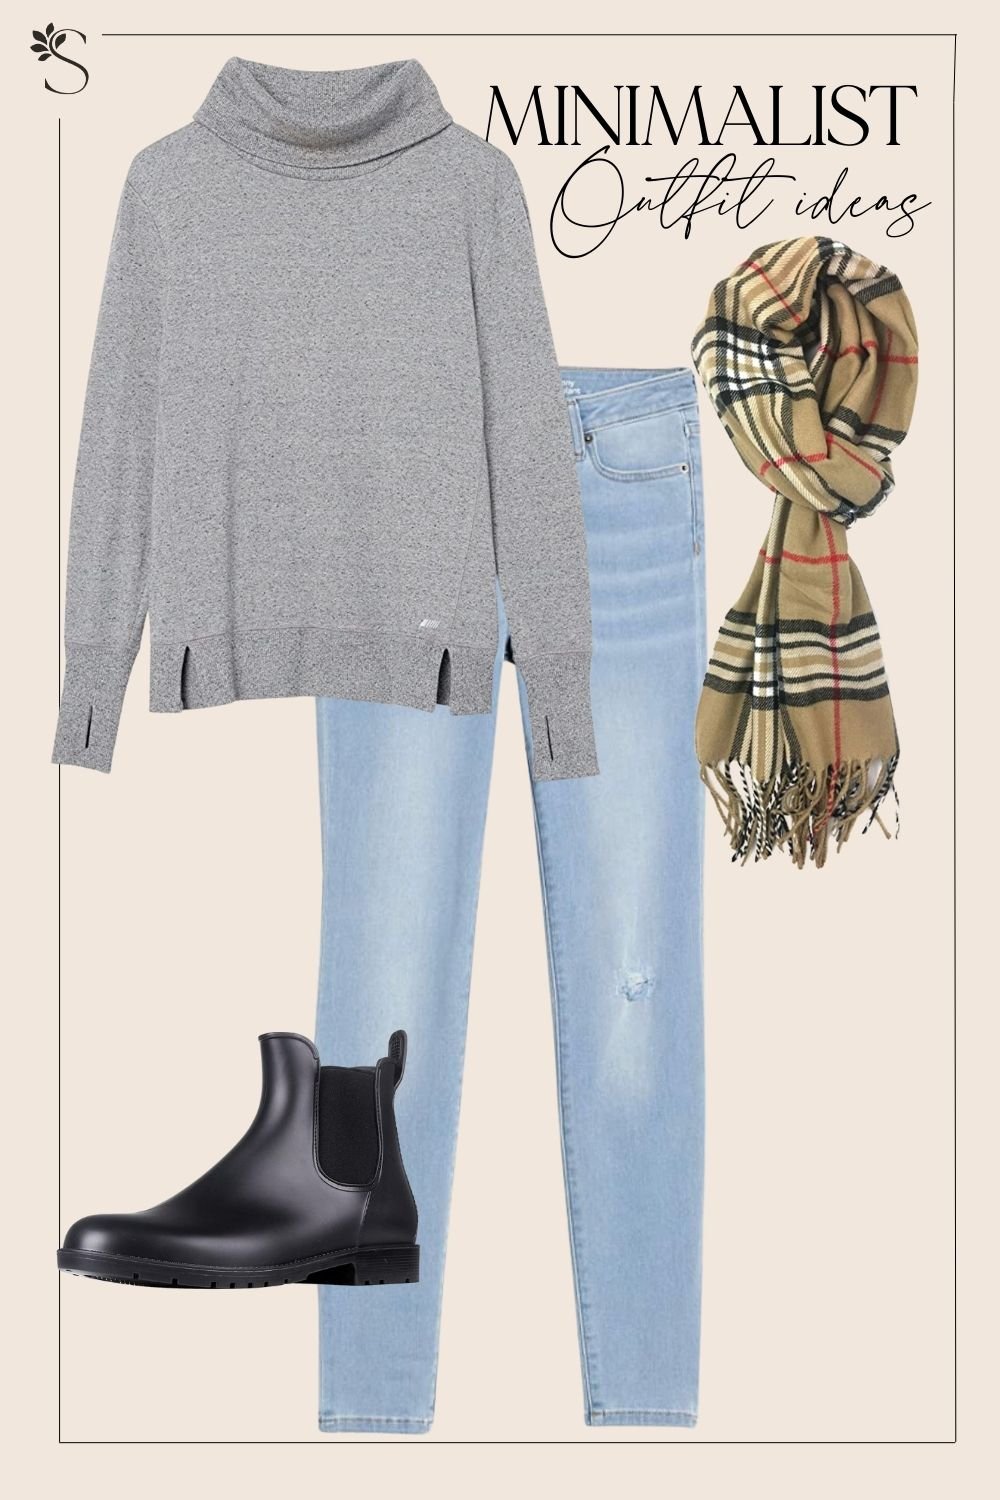 15 Edgy Outfits for Your Fall Wardrobe